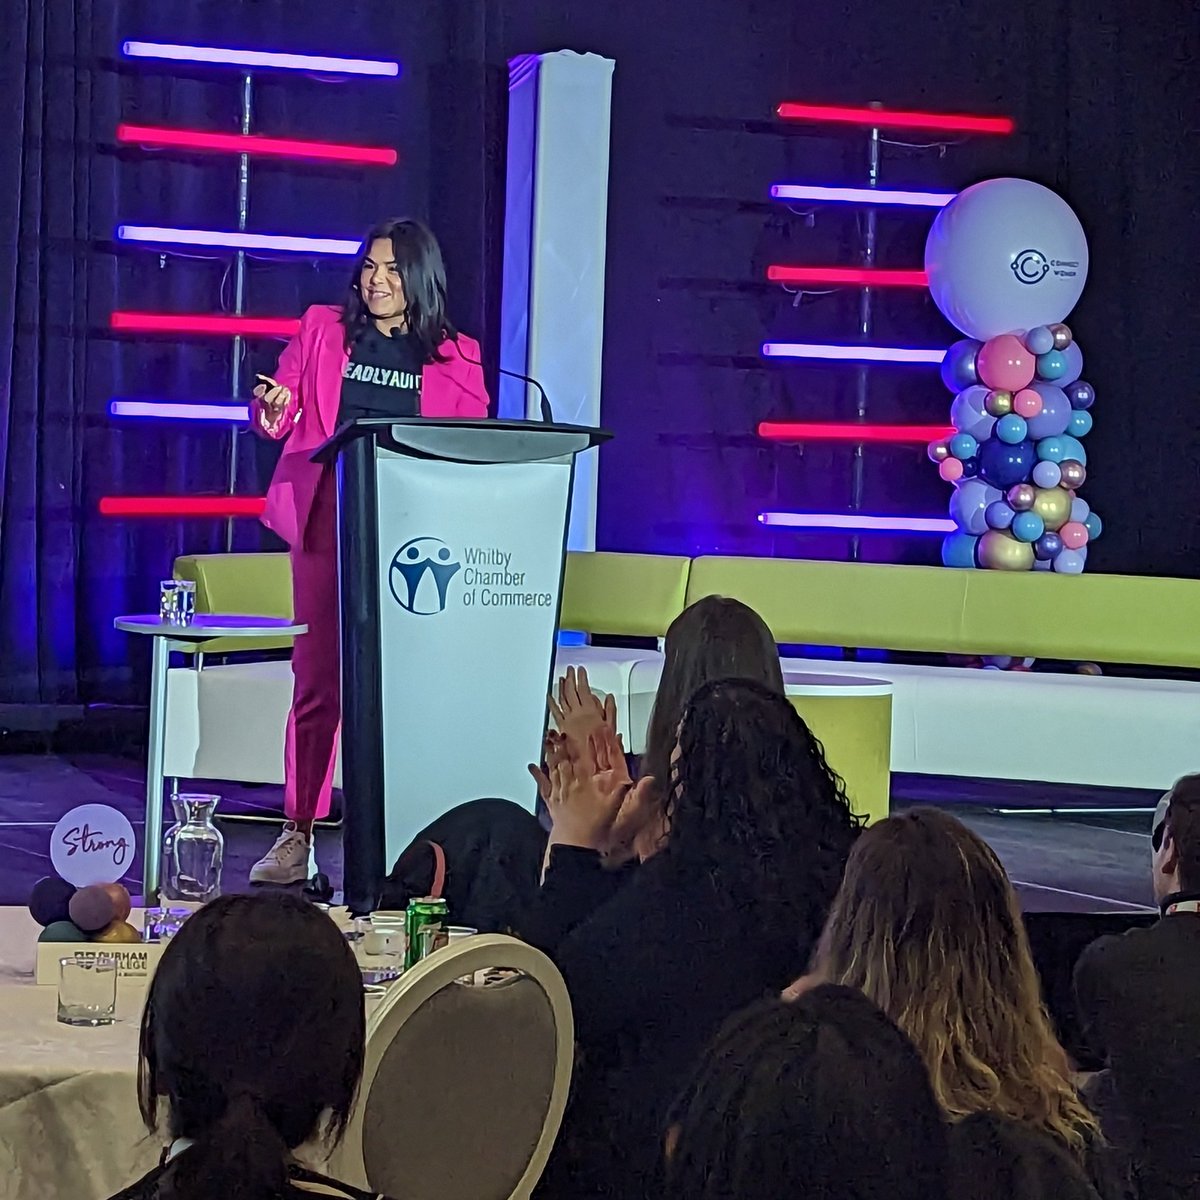 'Give people a *reason* to work for and believe in your company. Cultivate intentional purpose. The world *needs* this right now.' - Jenn Harper, @cheekbonebeauty 👏👏👏 #connectwomen2023 @WhitbyChamber